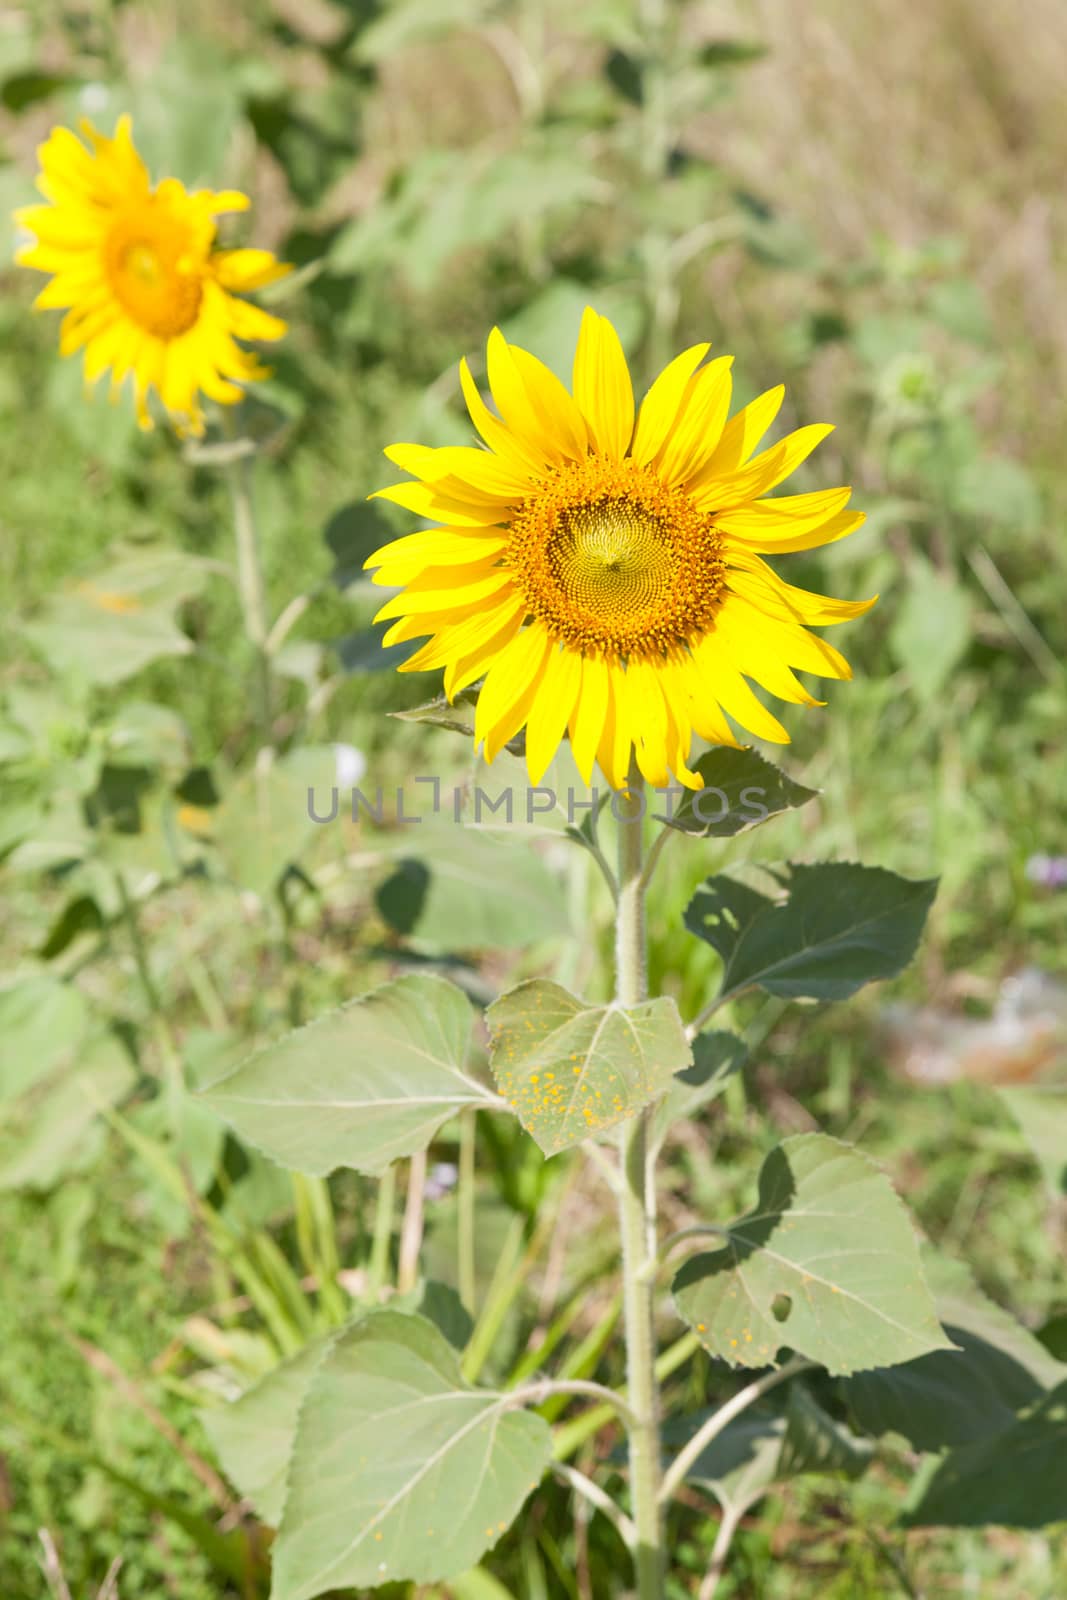 Sunflowers in the field. Sunflower sunflowers in full bloom in the morning.